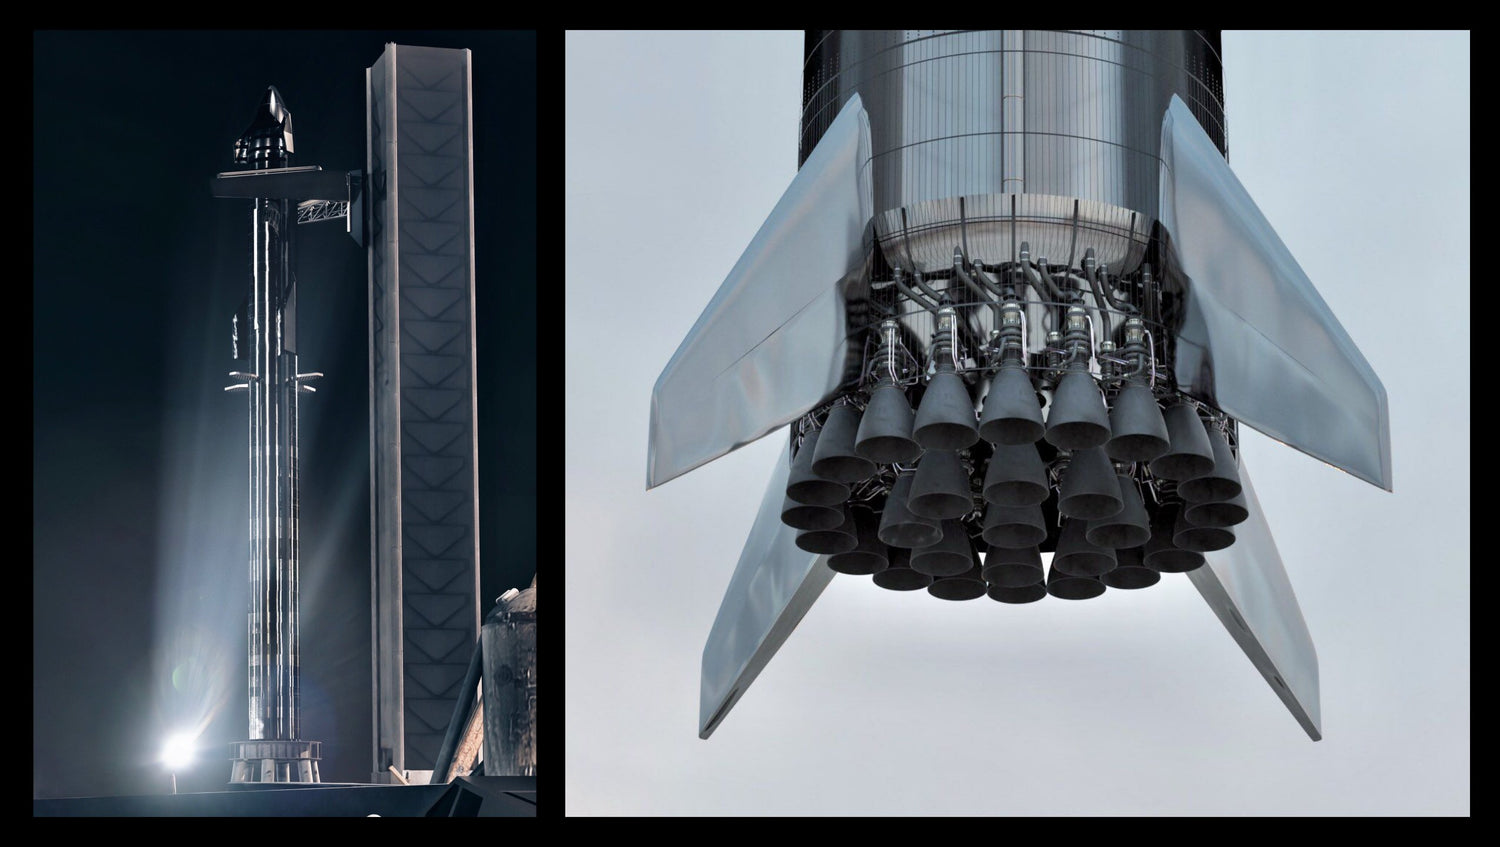 SpaceX’s Starship Super Heavy Rocket Will Be Equipped With Over 29 Powerful Raptor Engines